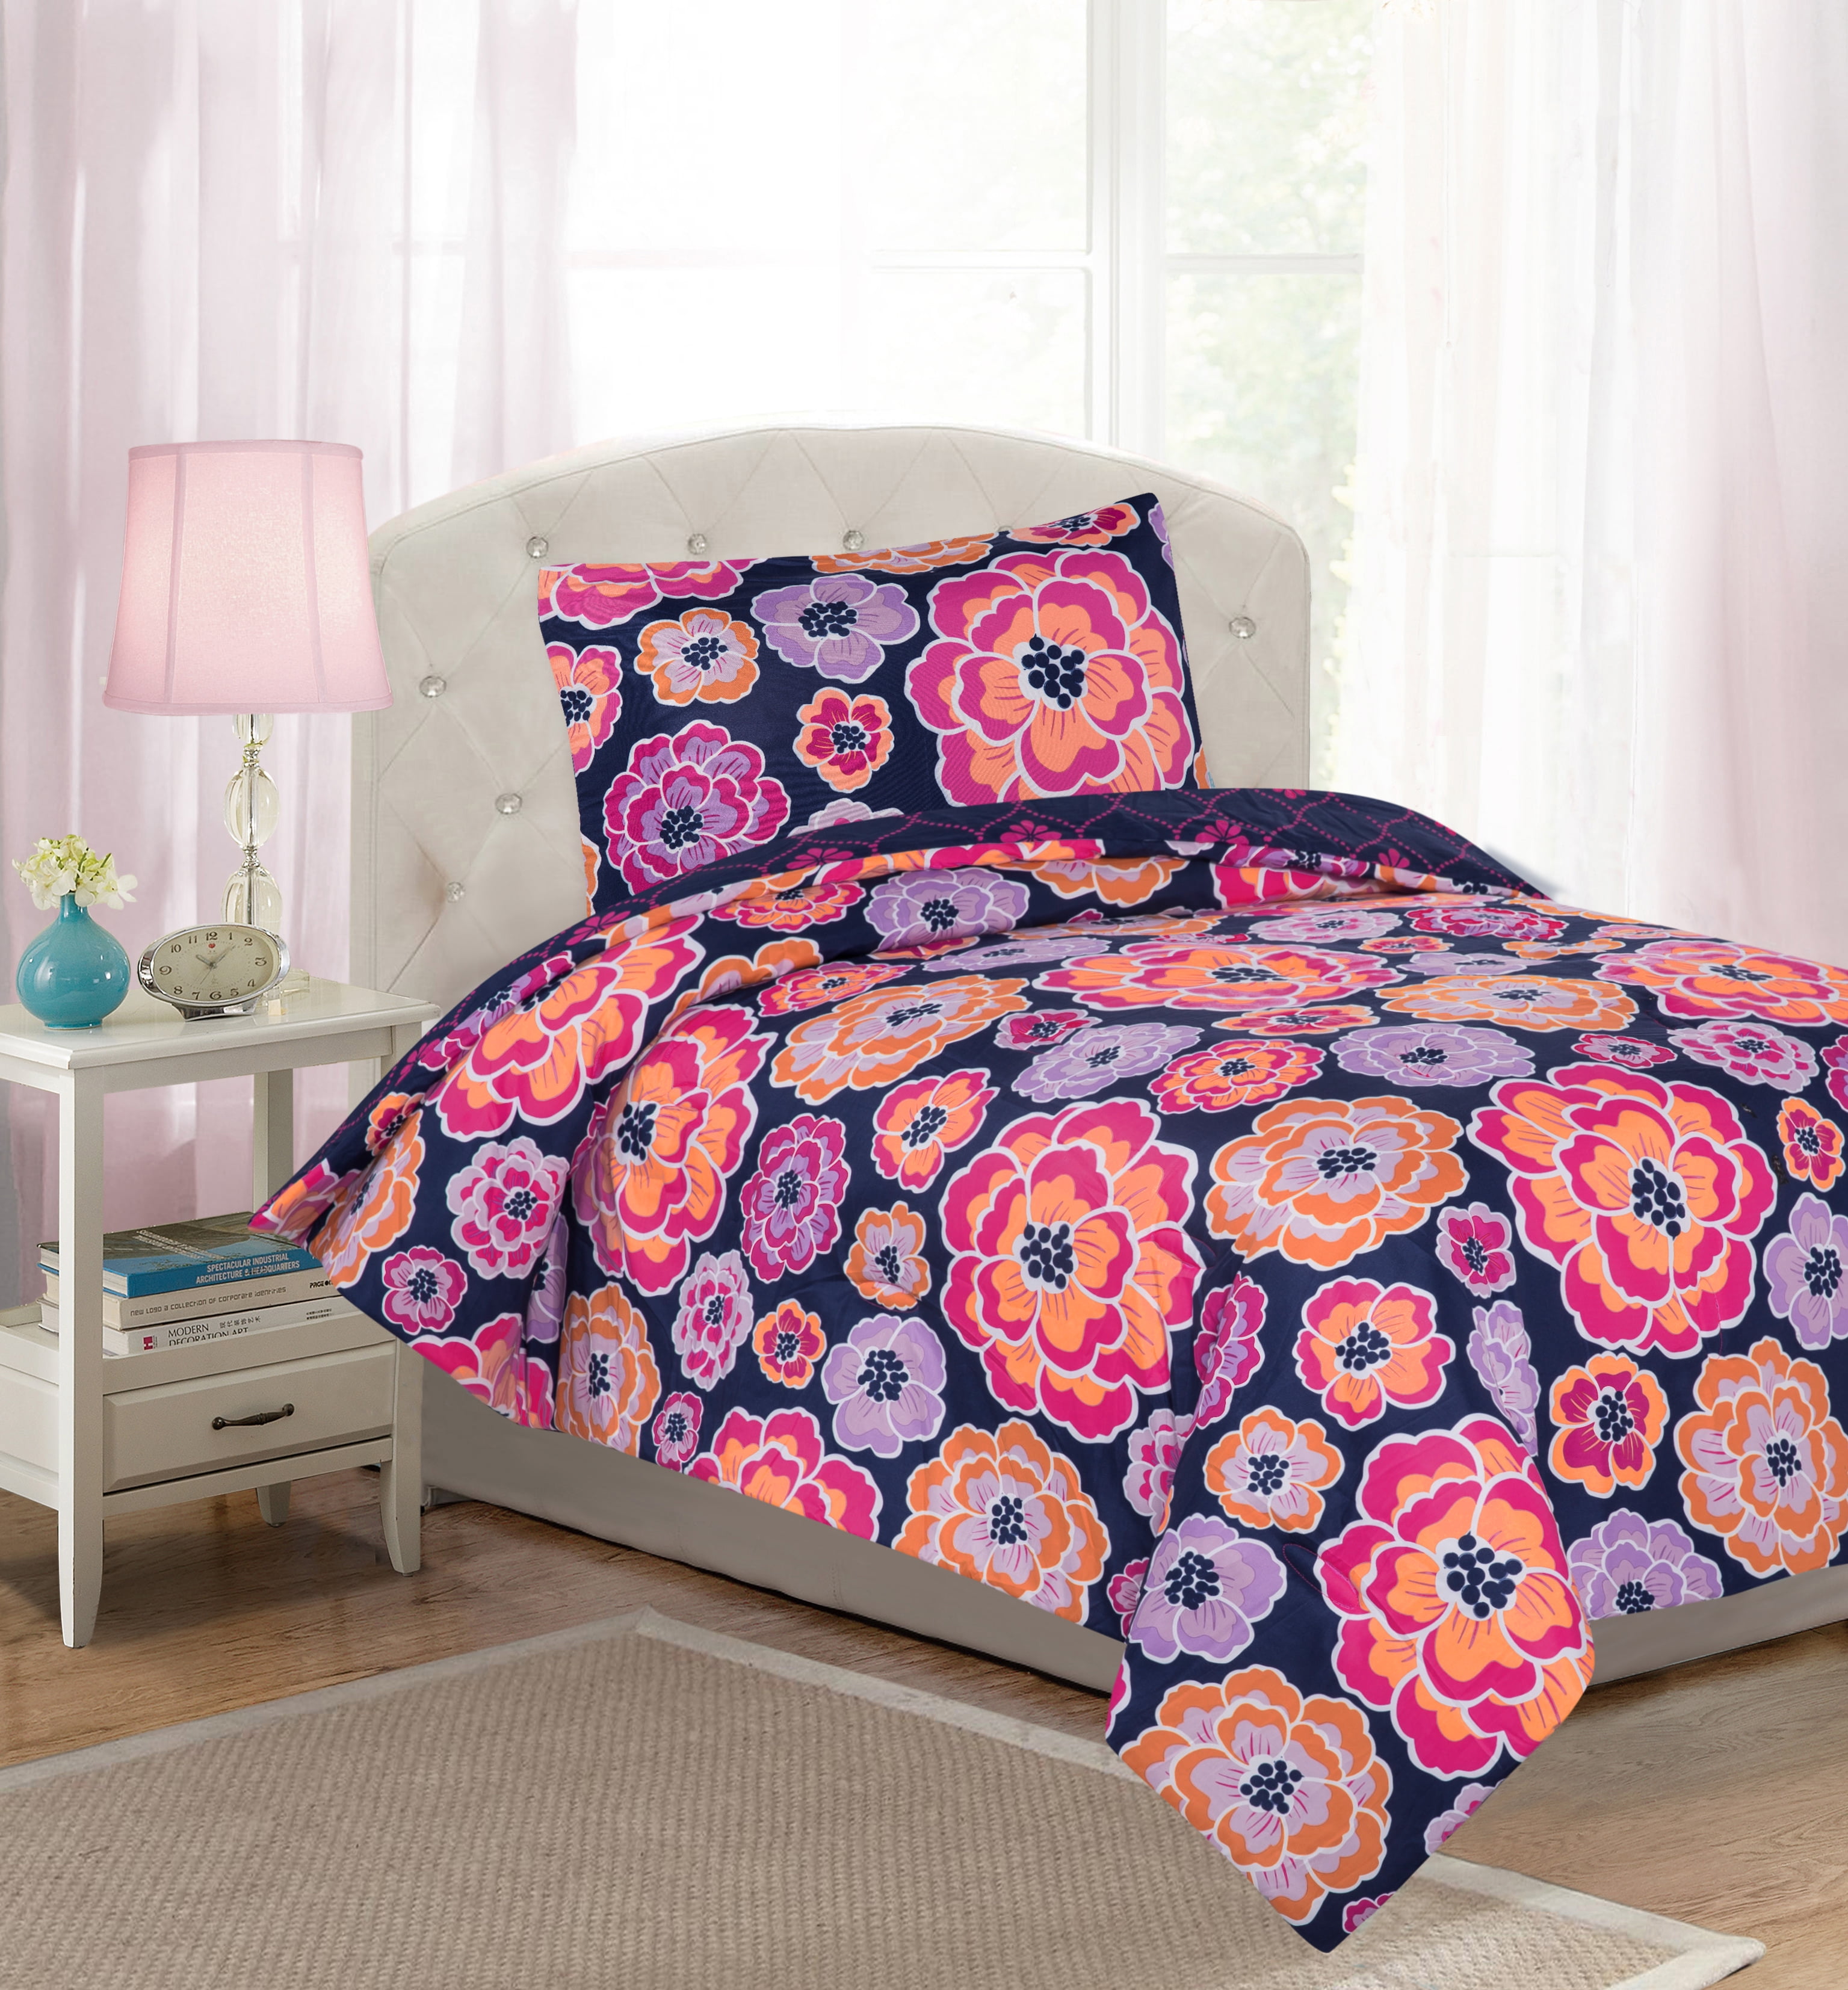 Details about   Twin Full Bed Bag Pink Navy Blue Green Floral Love Geometric 9 pc Comforter Set 